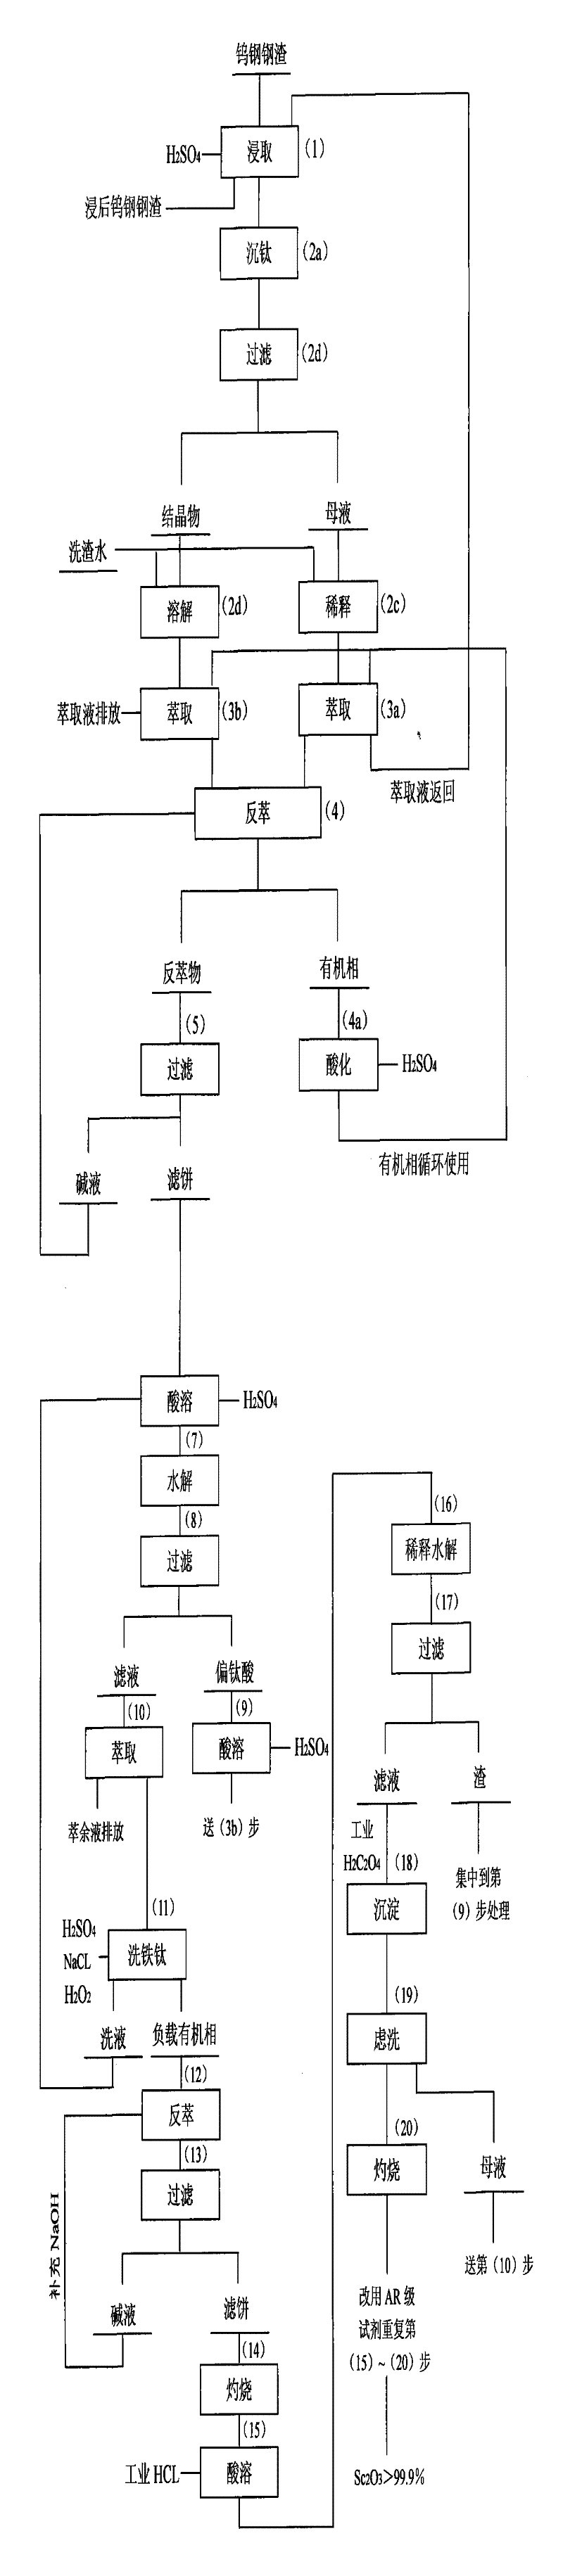 Method for extracting scandium oxide from tungsten steel slag